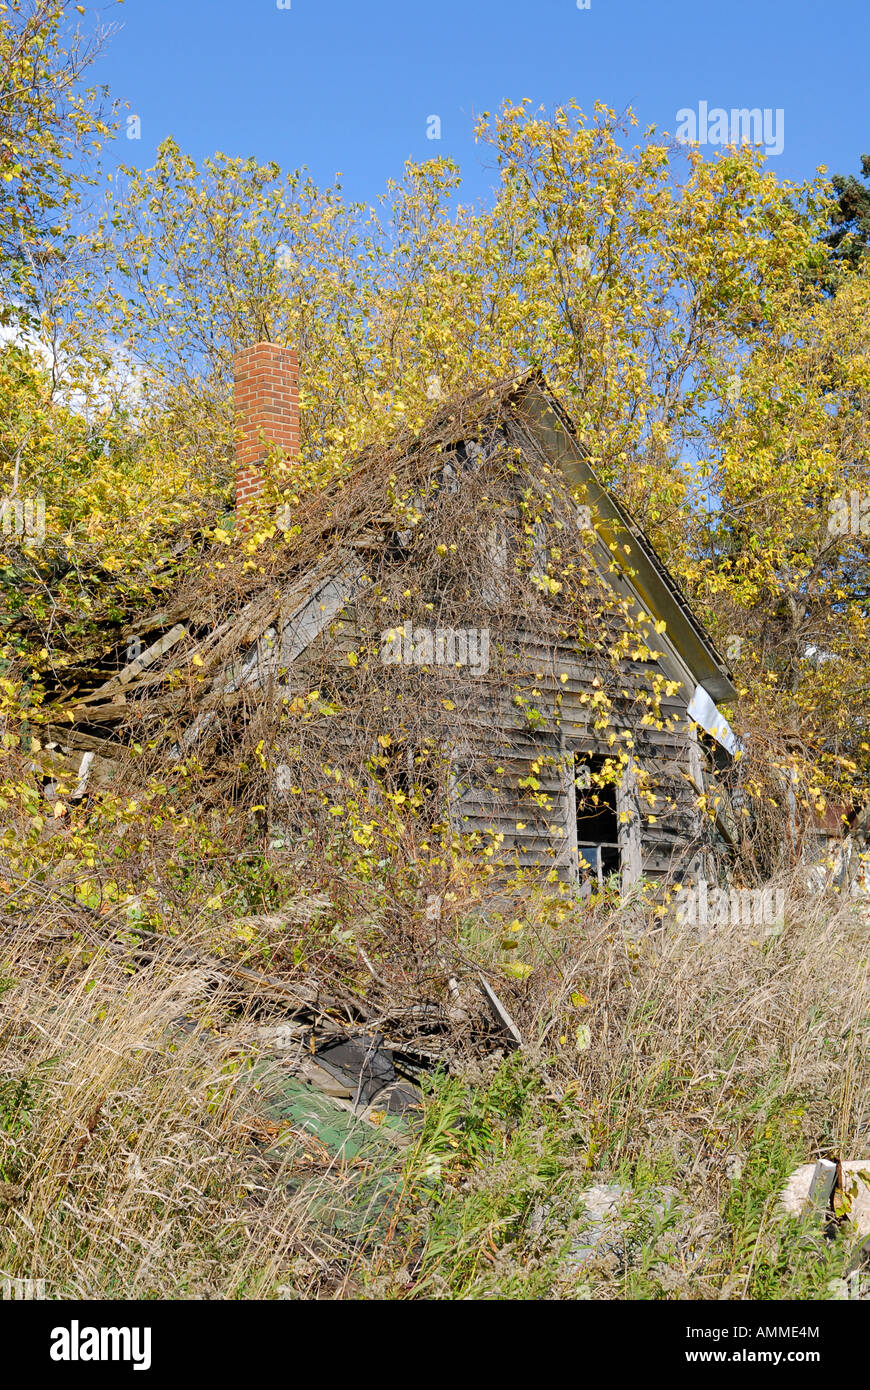 Dilapidated old farm house in a field during autumn time near Port Austin Michigan Stock Photo